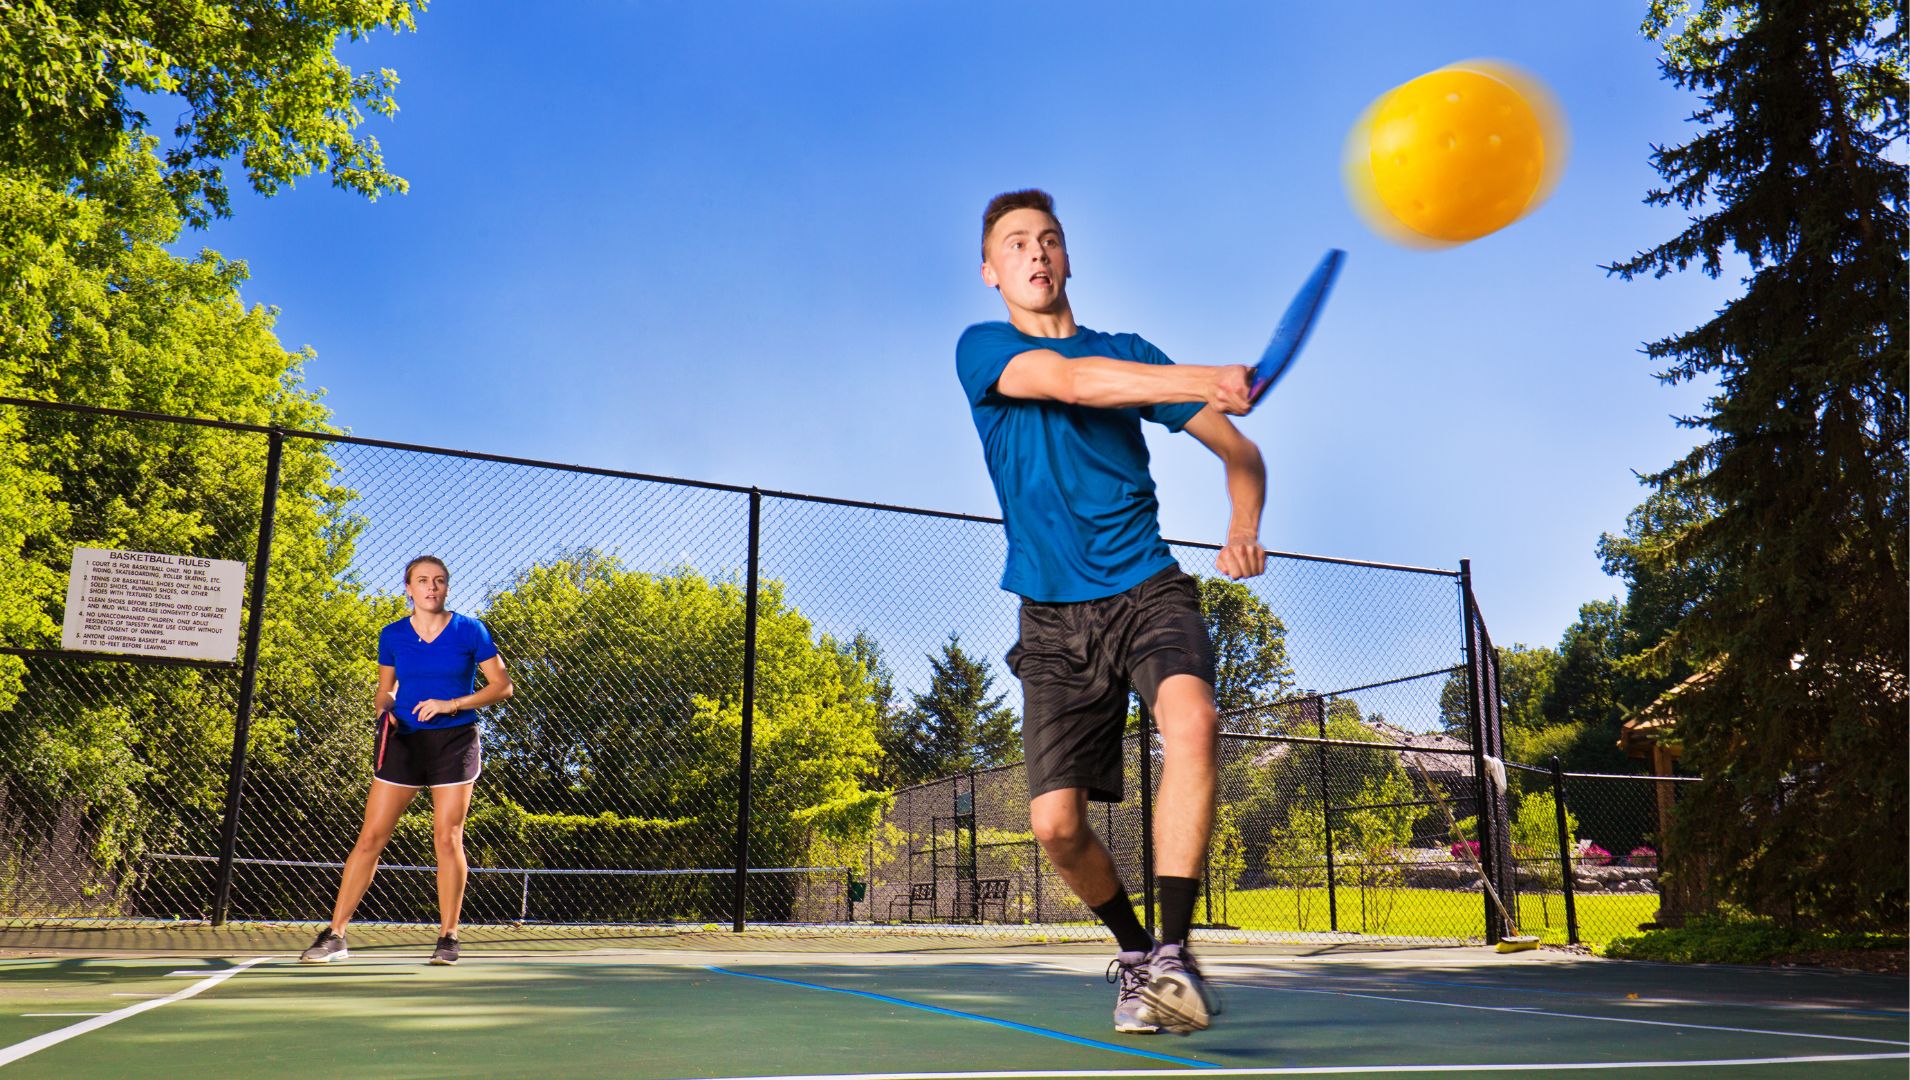 A couple play pickleball which is growing in popularity in Australia for its health benefits.